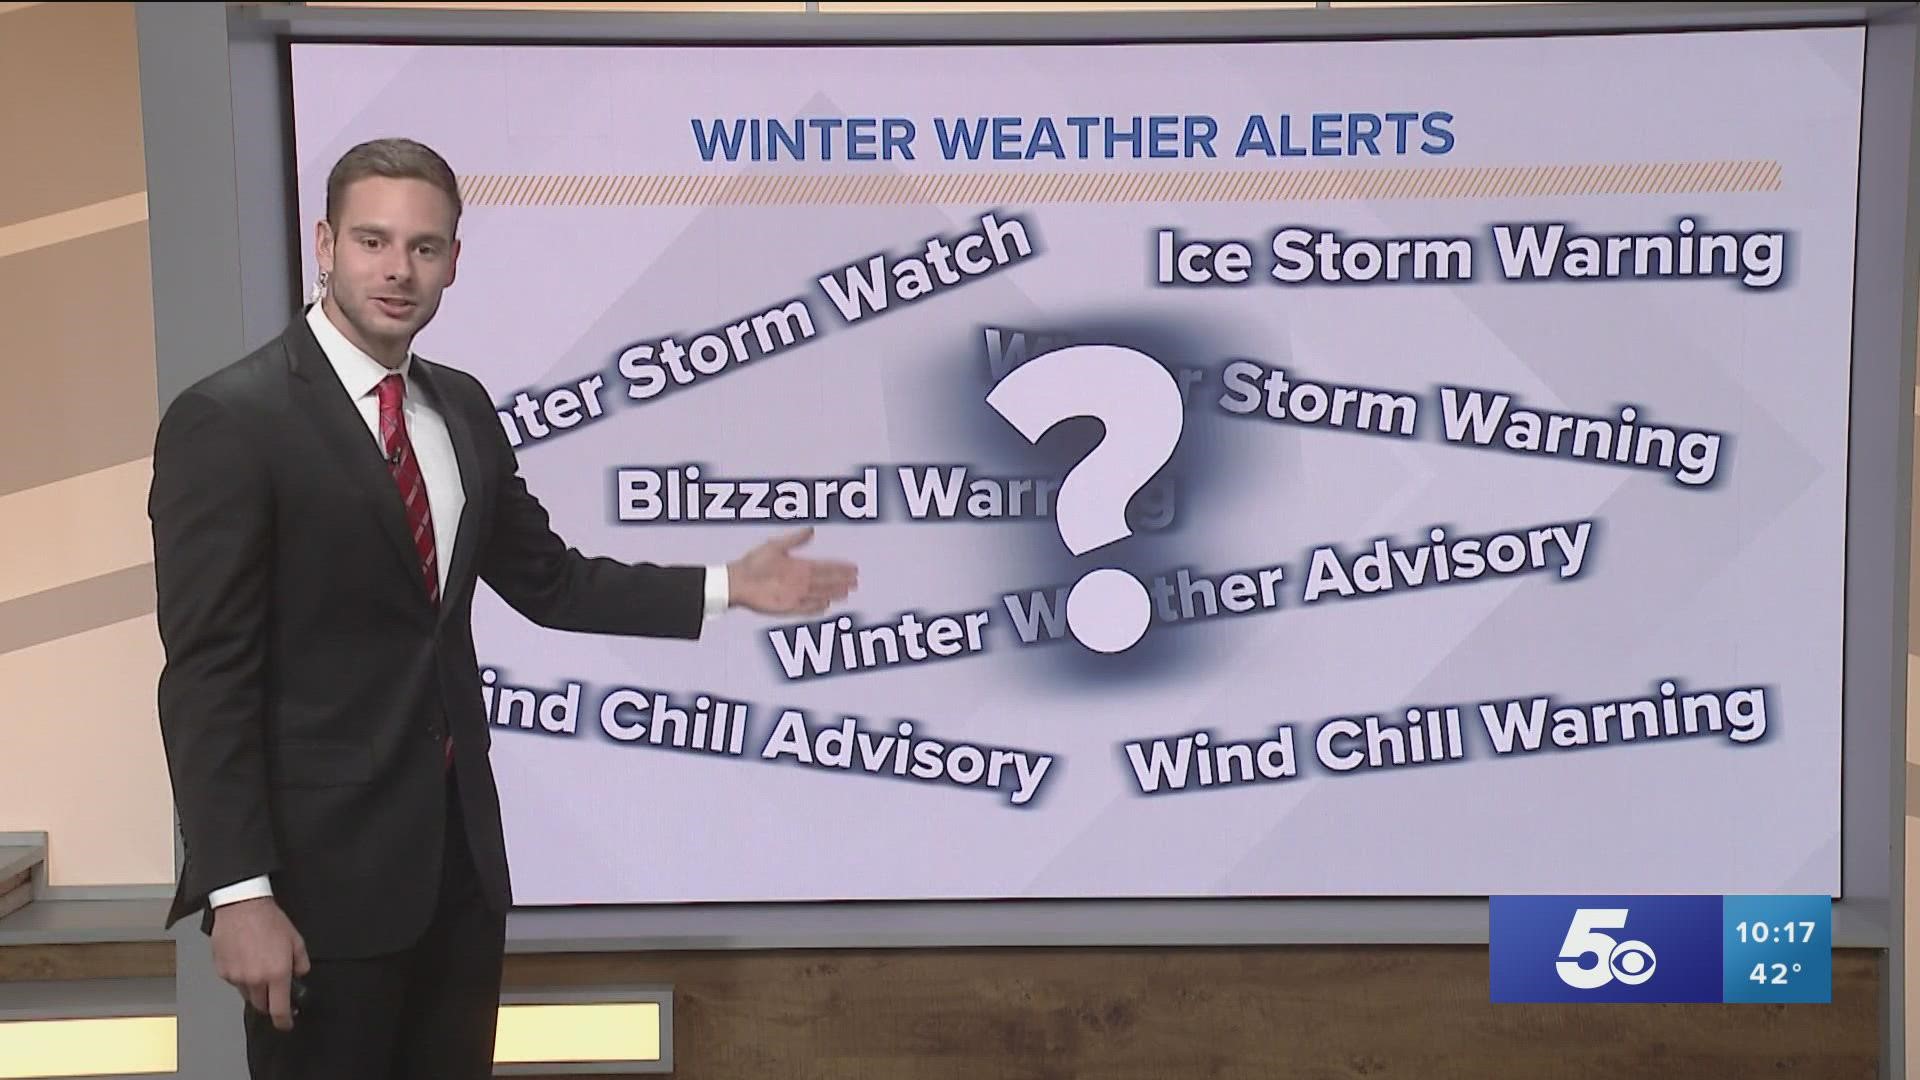 Winter warnings, watches, advisories, oh my! What does each one mean and how do they differ across the nation?